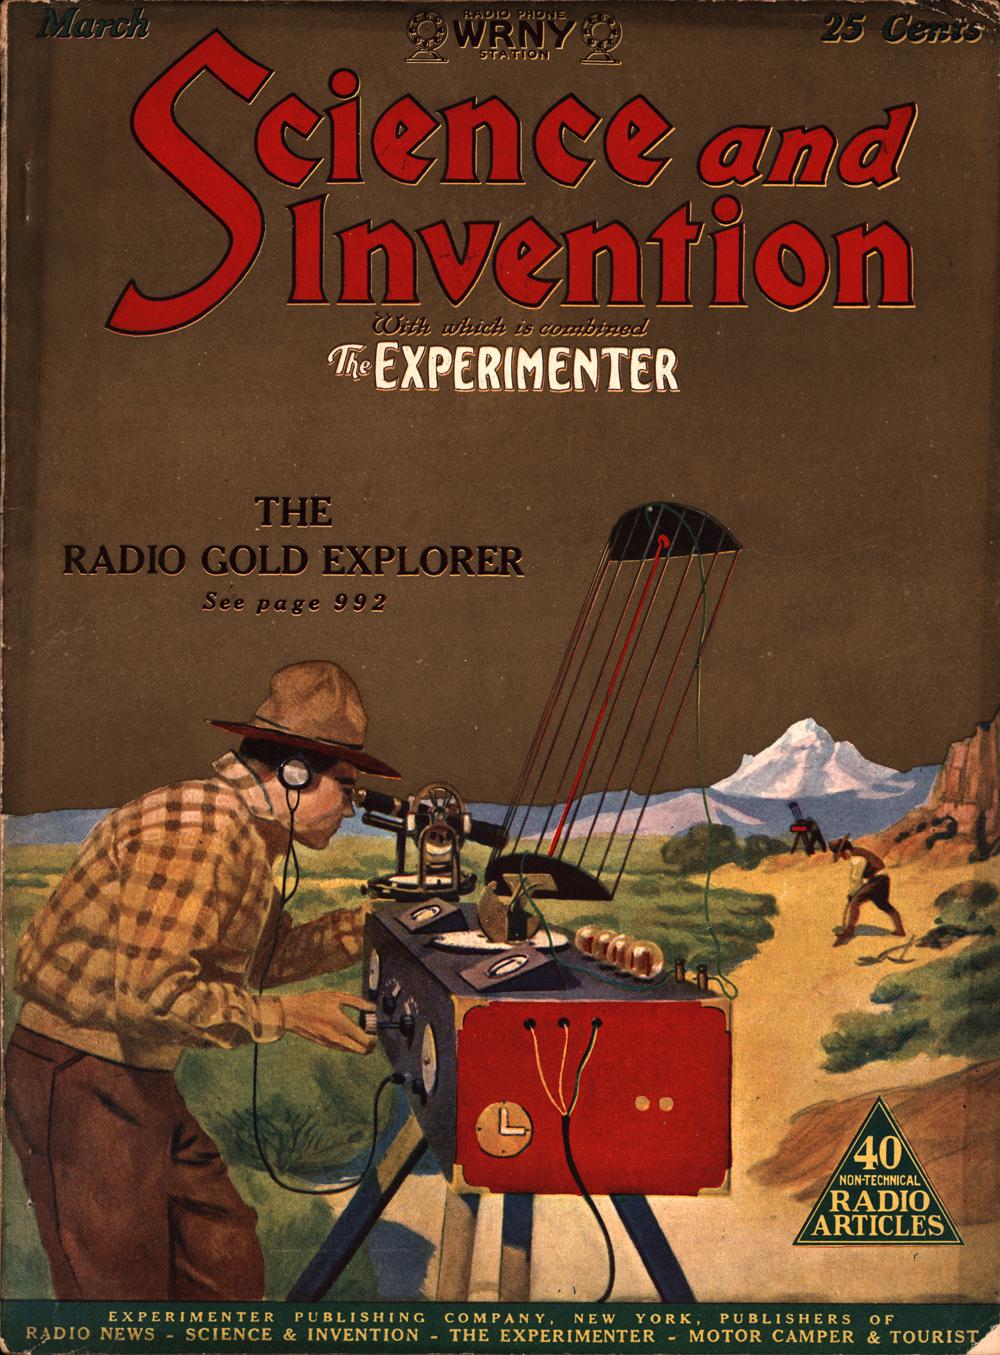 1926 - Science and invention - Vol. 13, No. 11